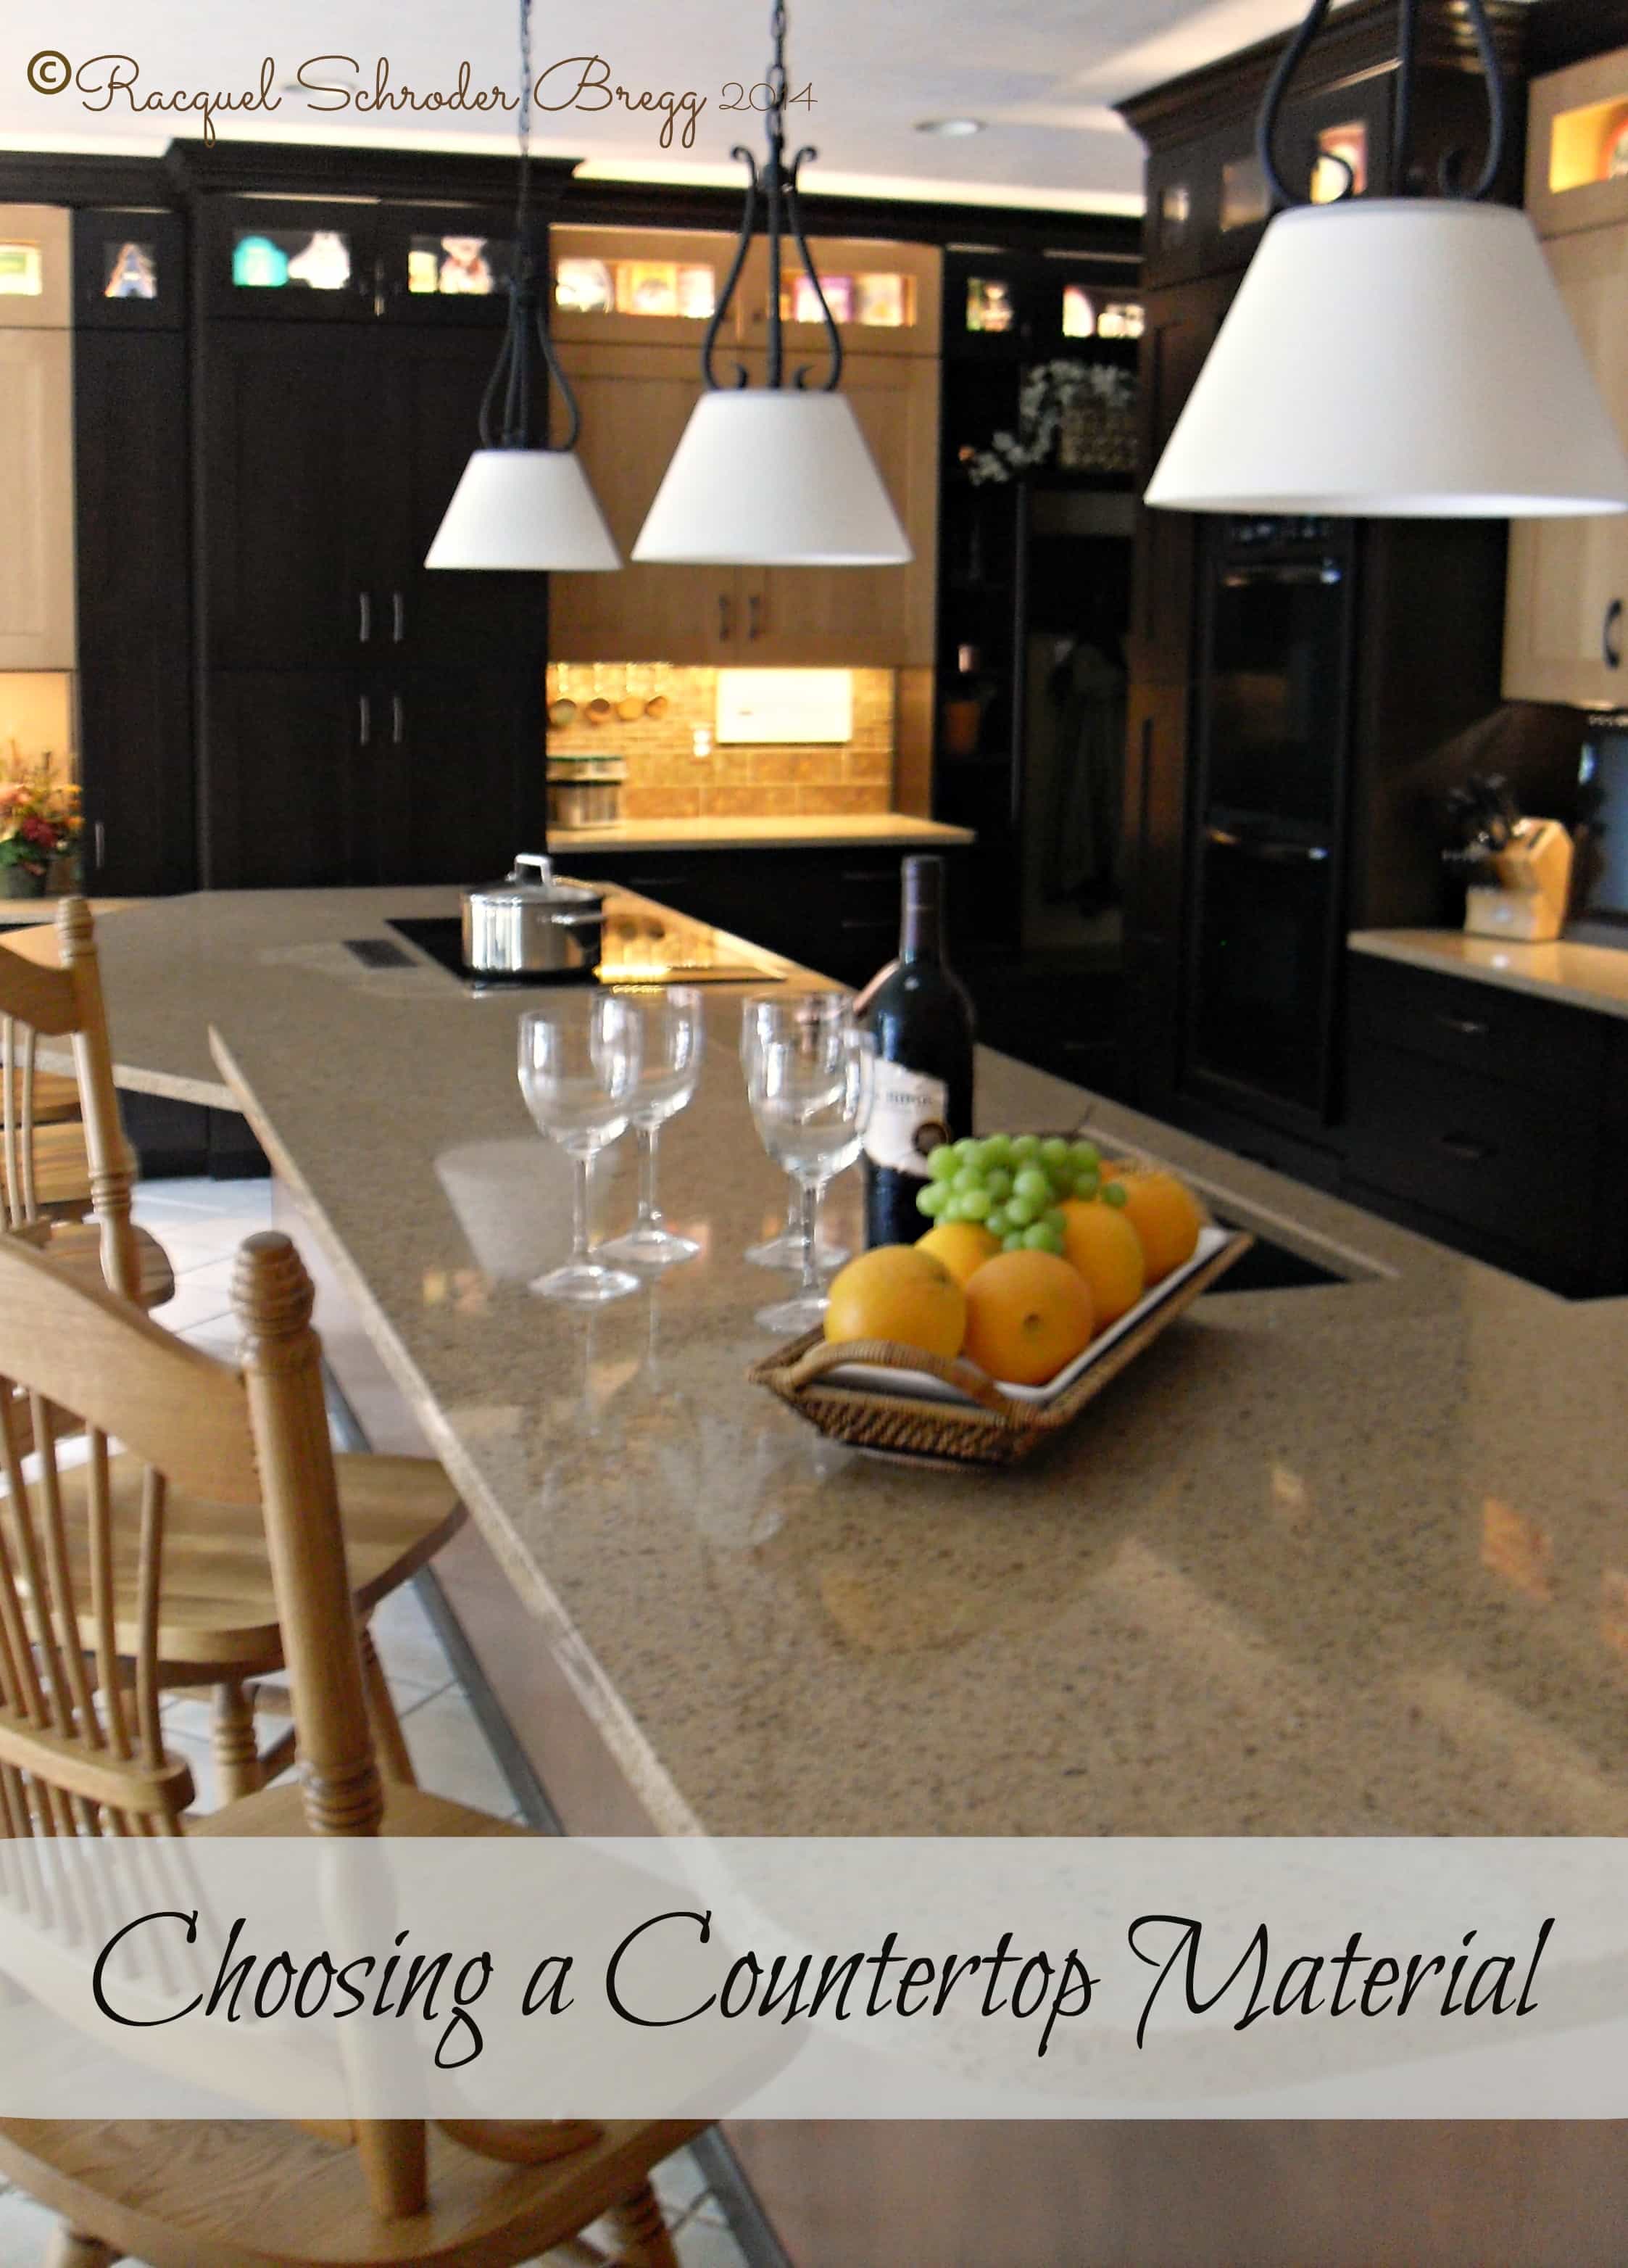 Choosing Countertop Materials - Countertop material options and a comparison of countertop materials with pros and cons of each, and countertops by price.